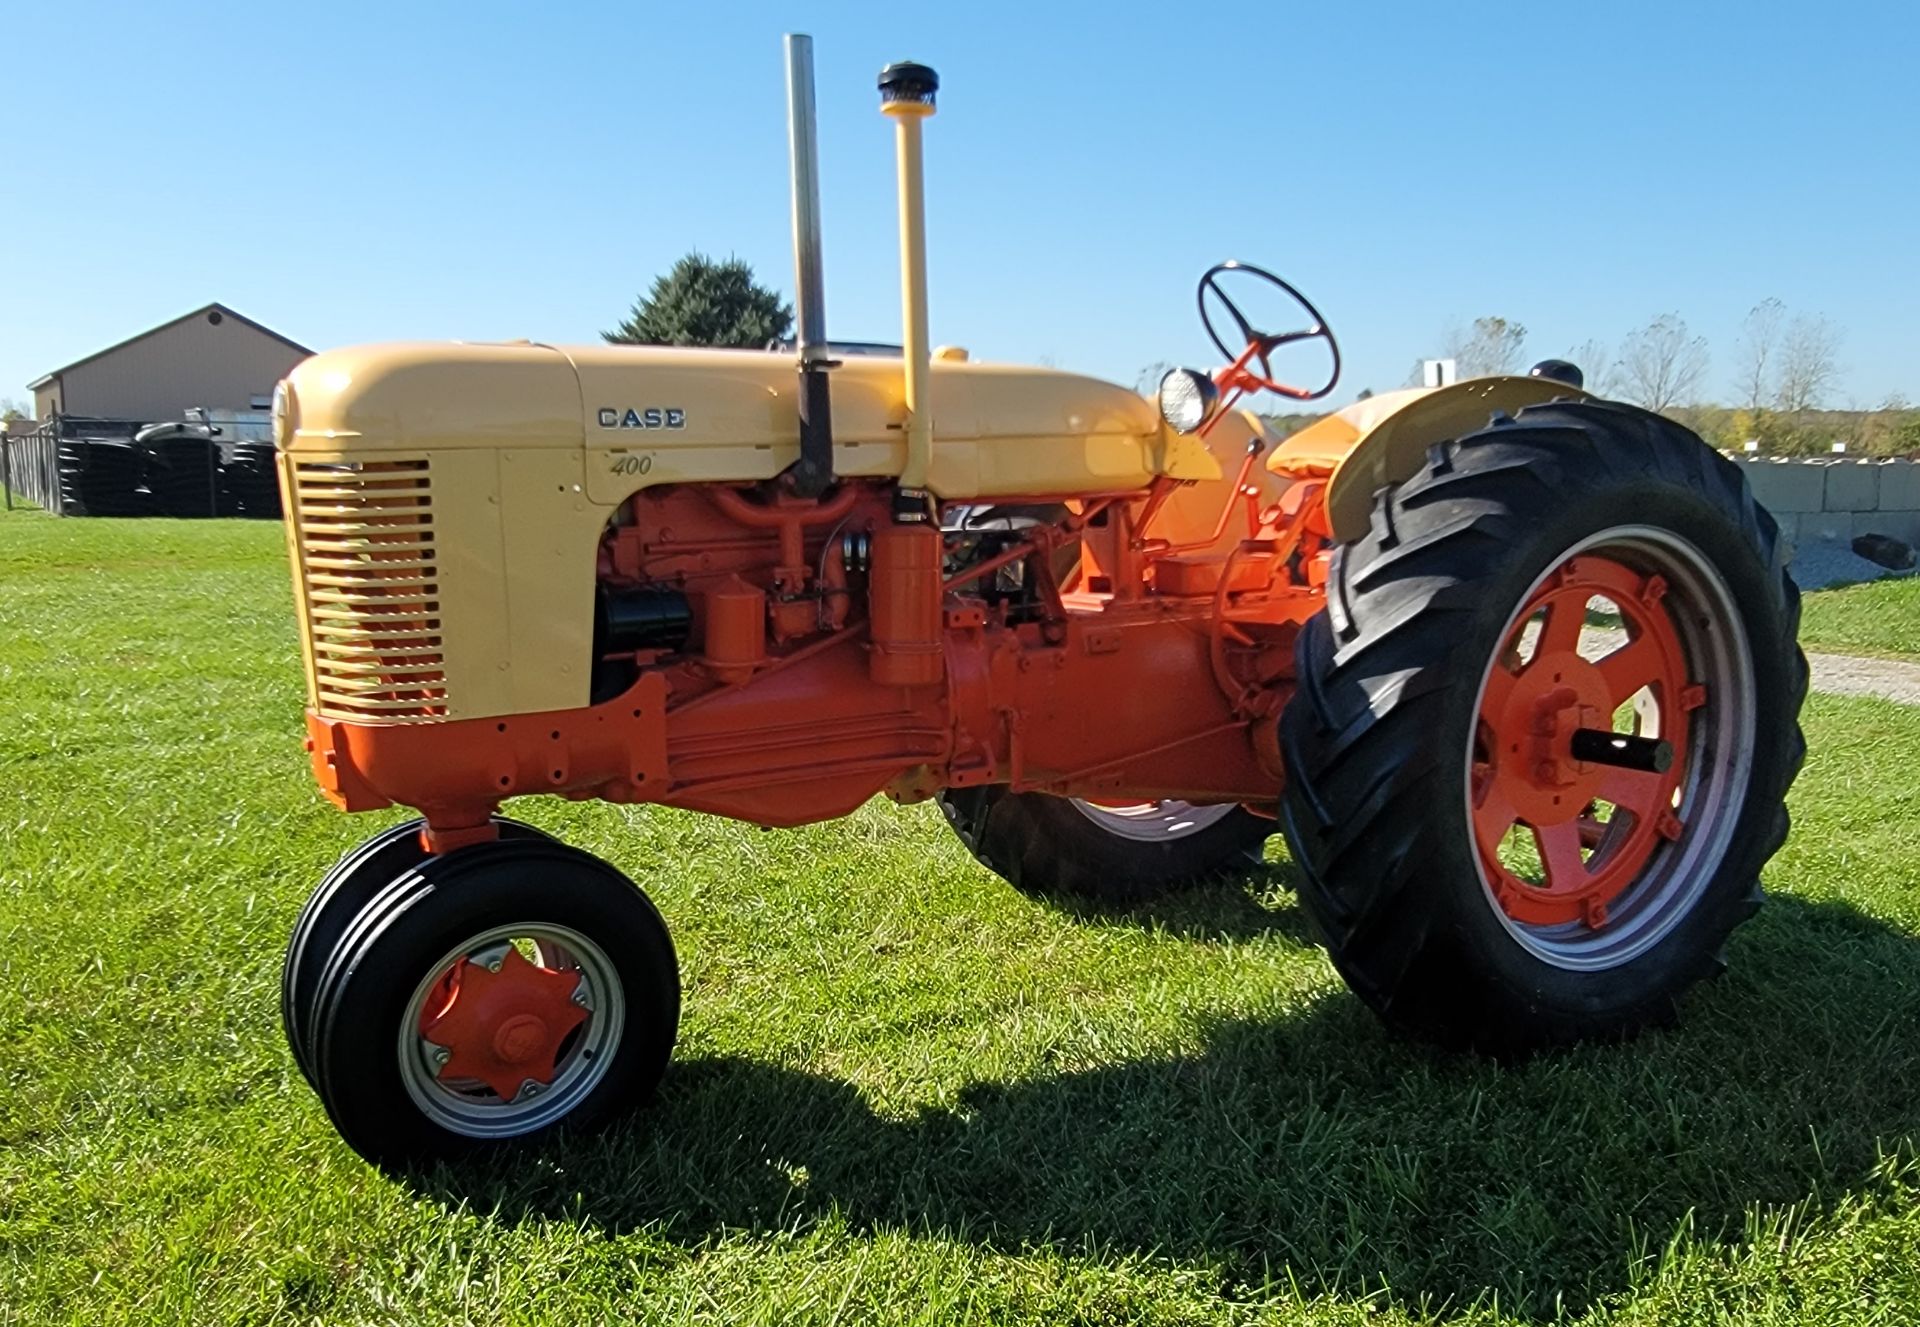 1956 Case 400 Row Crop Tractor, Model 411, s/n 8081224, Gasoline Engine, New in 1956, Restored - Image 2 of 32